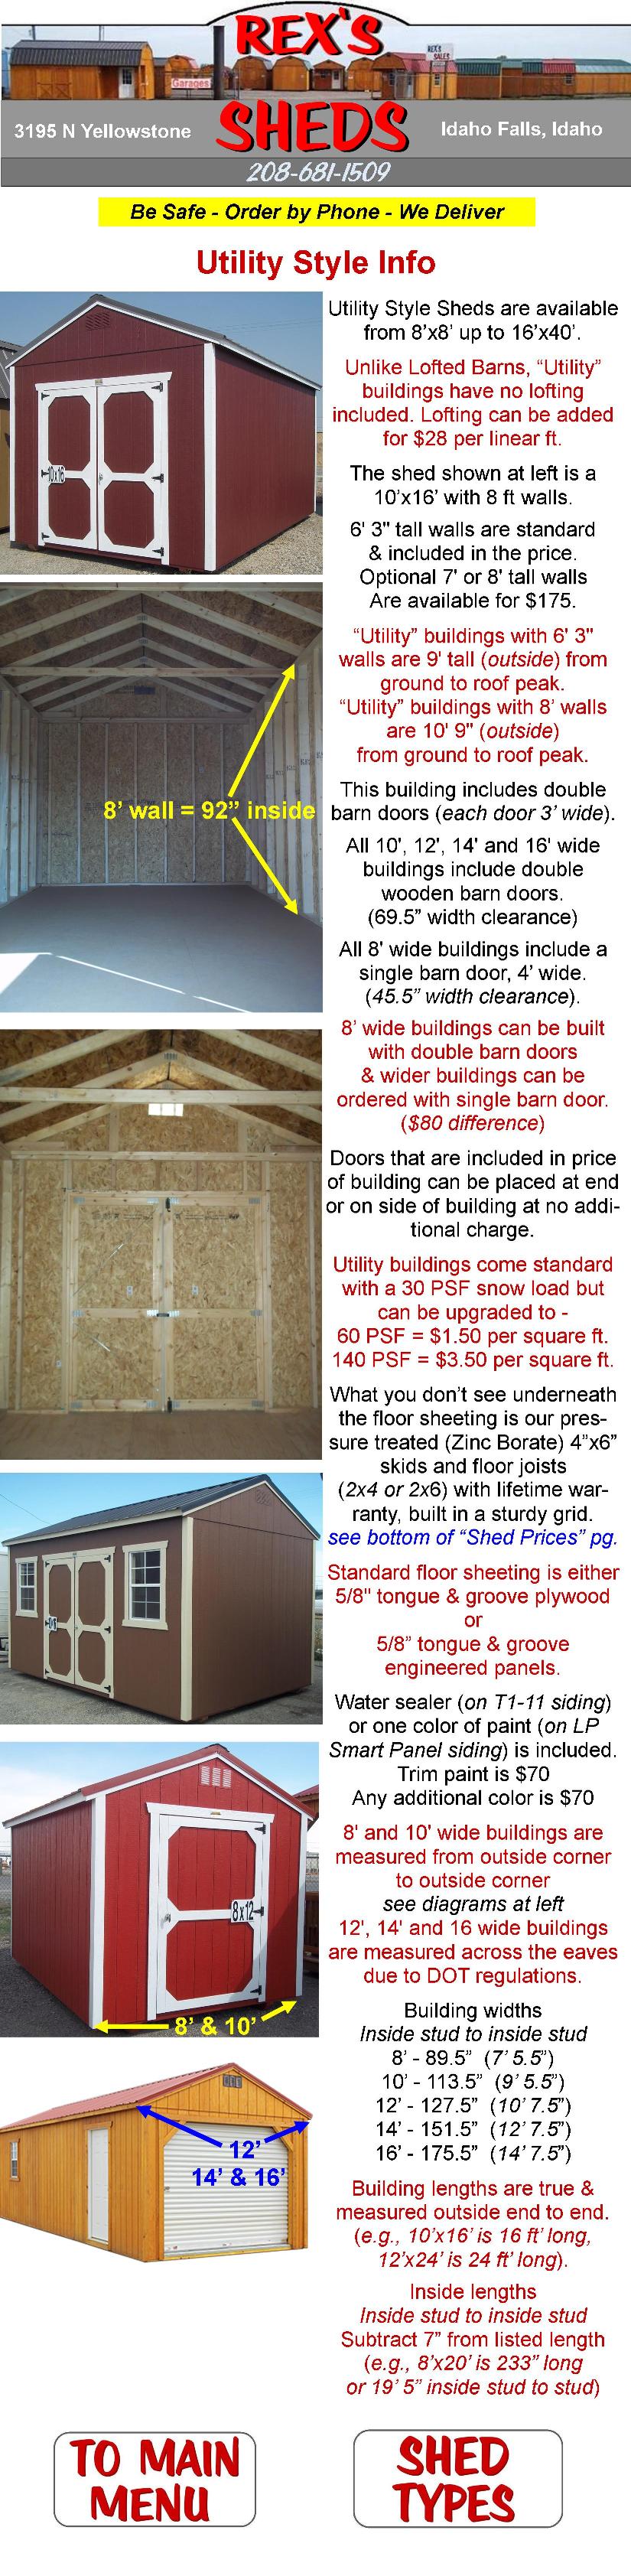 image_of_and_info_on_utility_style_storage_sheds_including_construction_style_snow_load_capacity_measurements_siding_doors_more